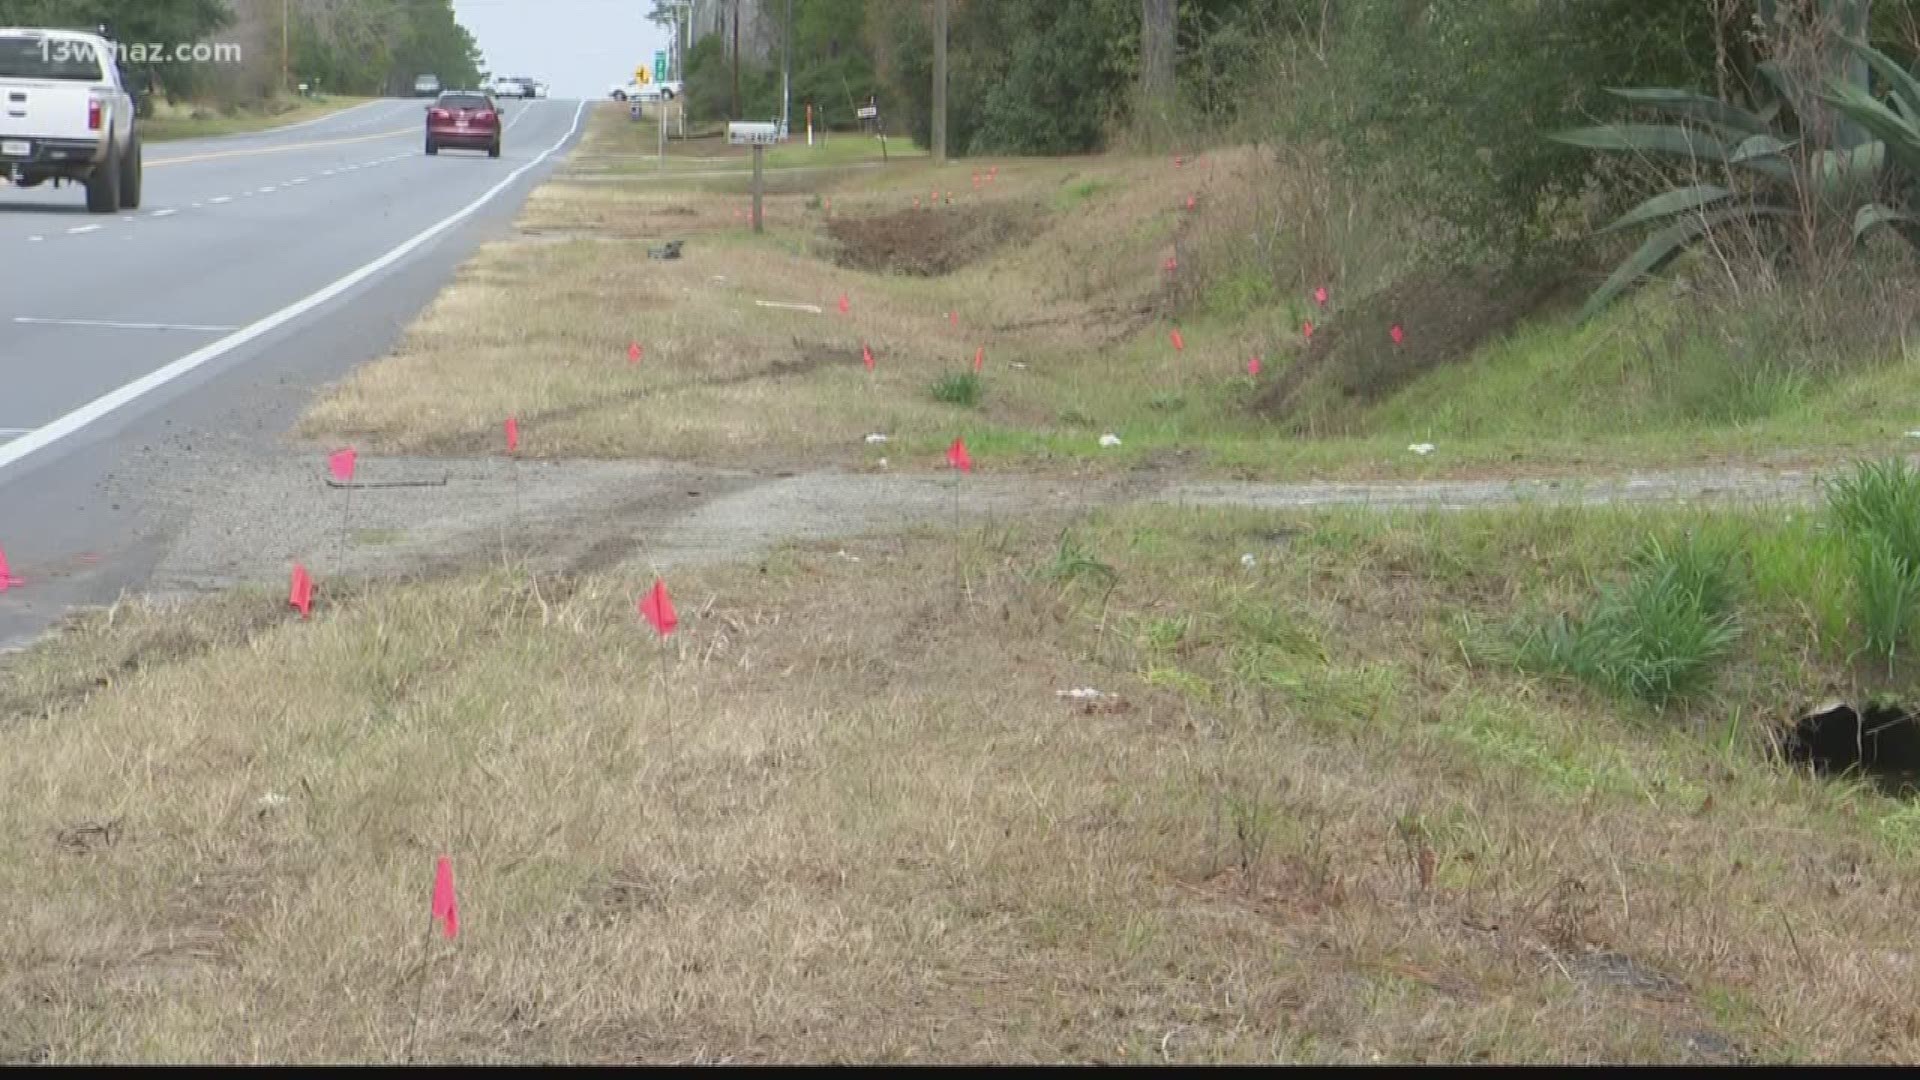 One person died and another was airlifted to a hospital after a high-speed chase ended with a PIT maneuver in Laurens County on Thursday afternoon.